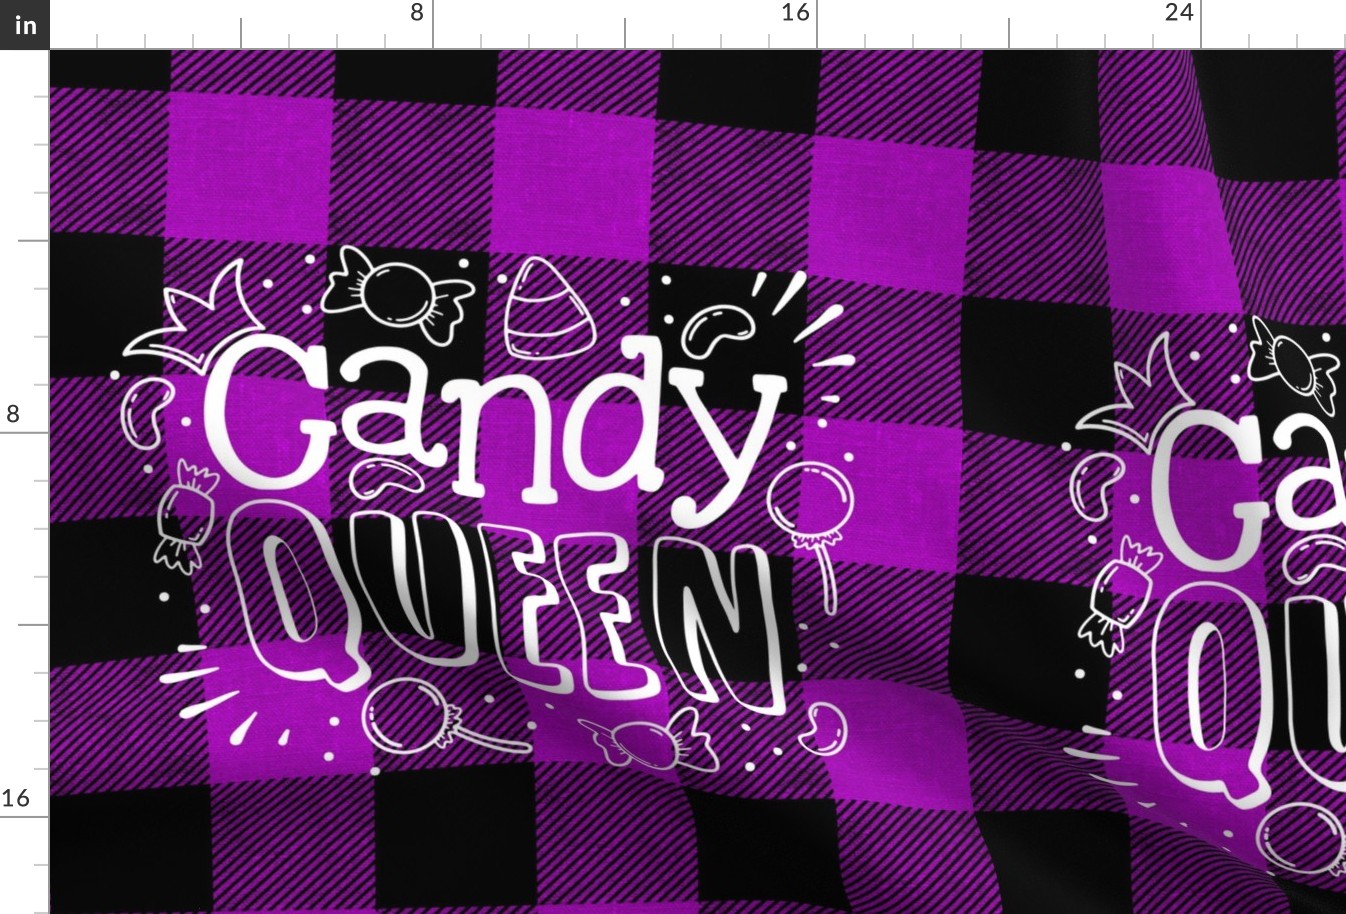 Candy Queen on purple plaid- 18 inch square